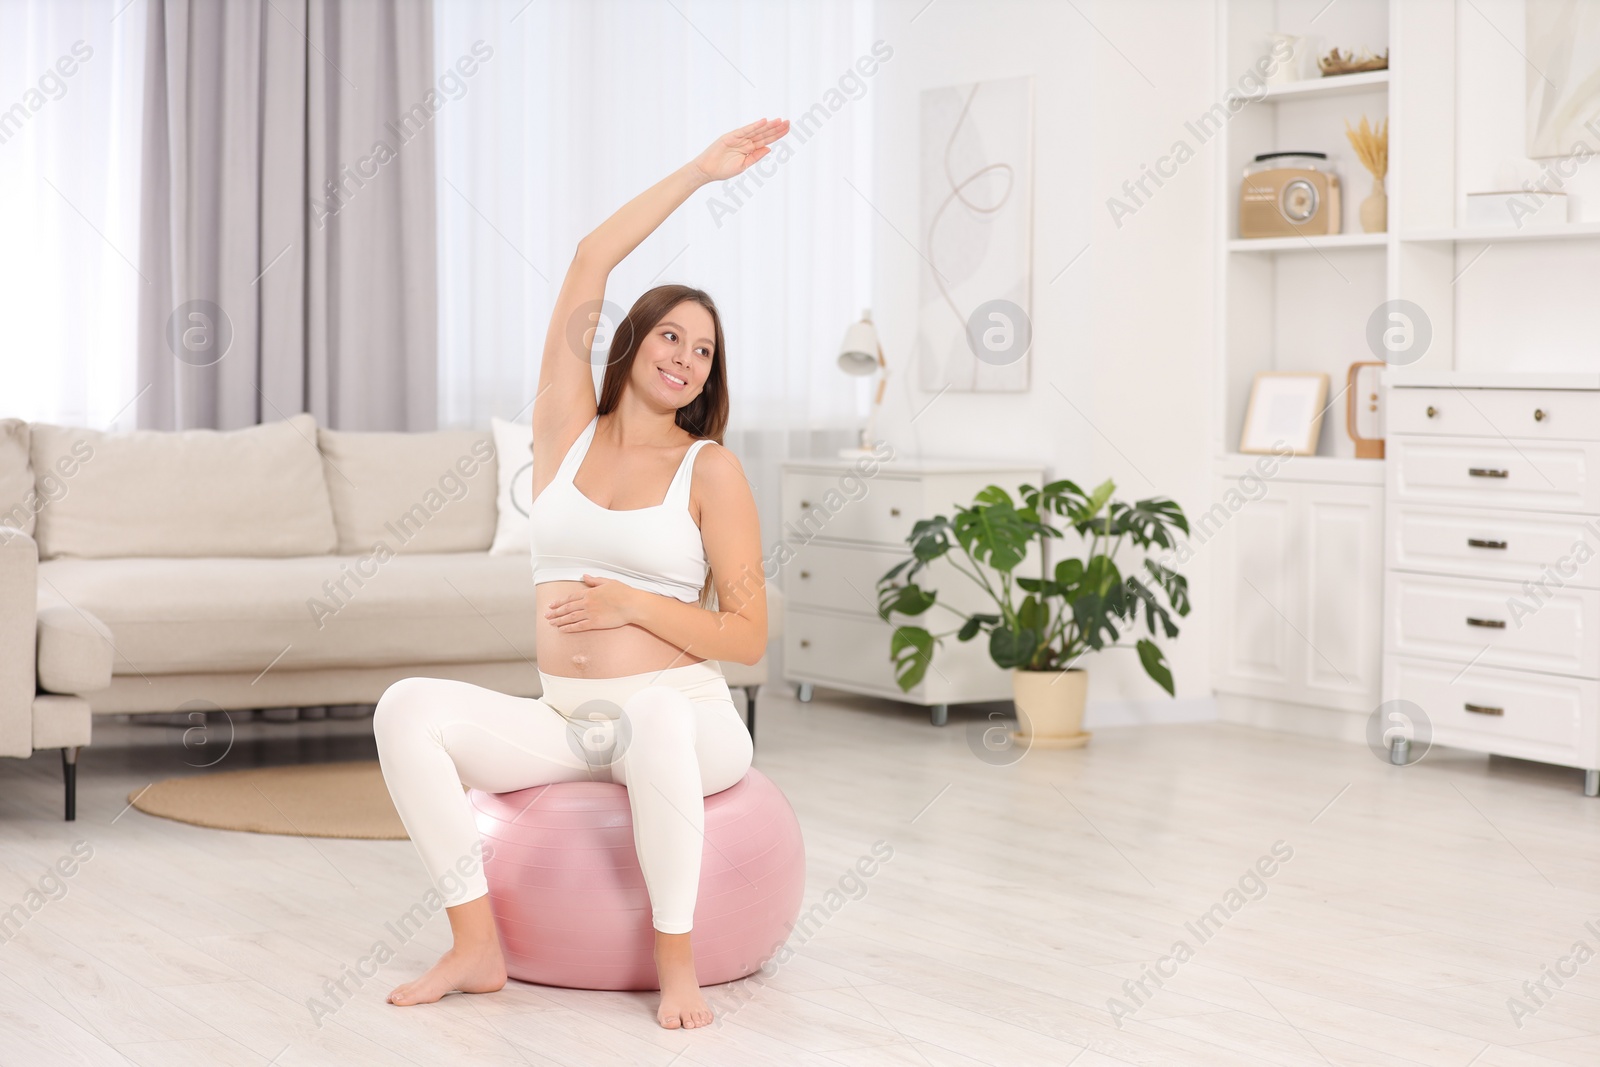 Photo of Pregnant woman doing exercises on fitness ball in room, space for text. Home yoga